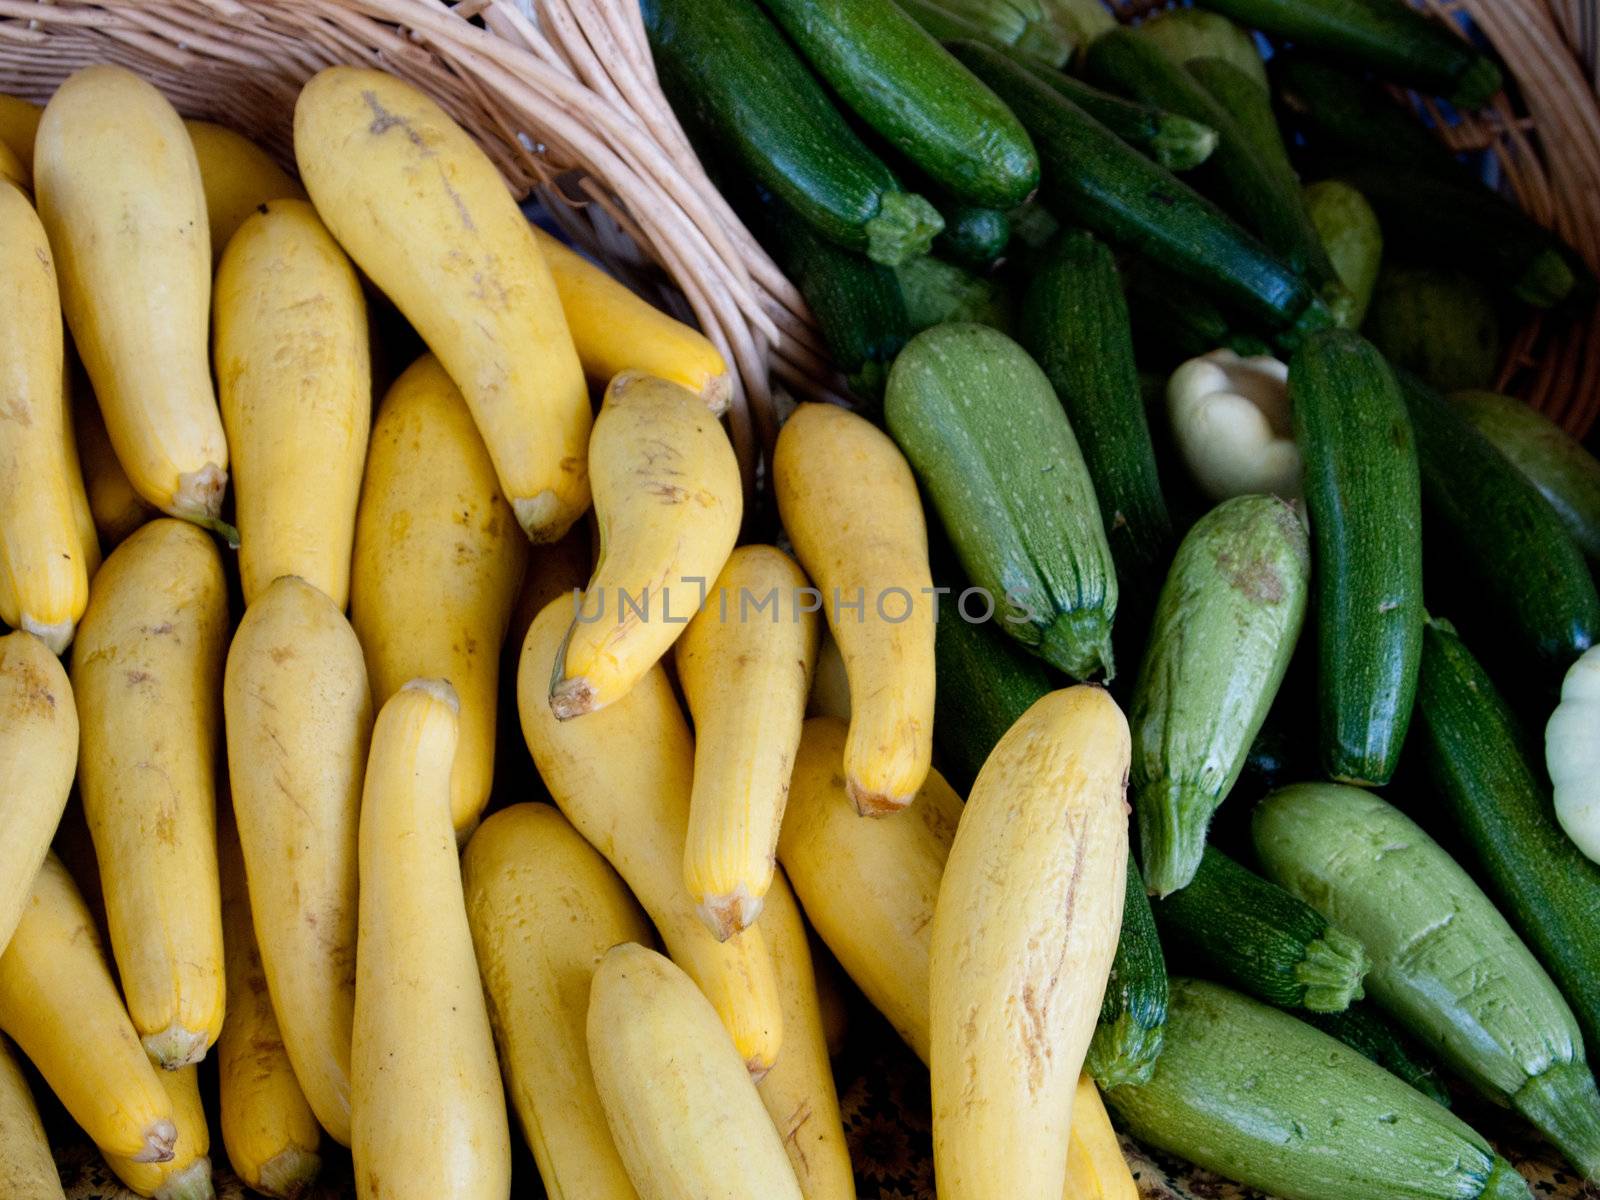 Vegetables displayed at a farmers market stall